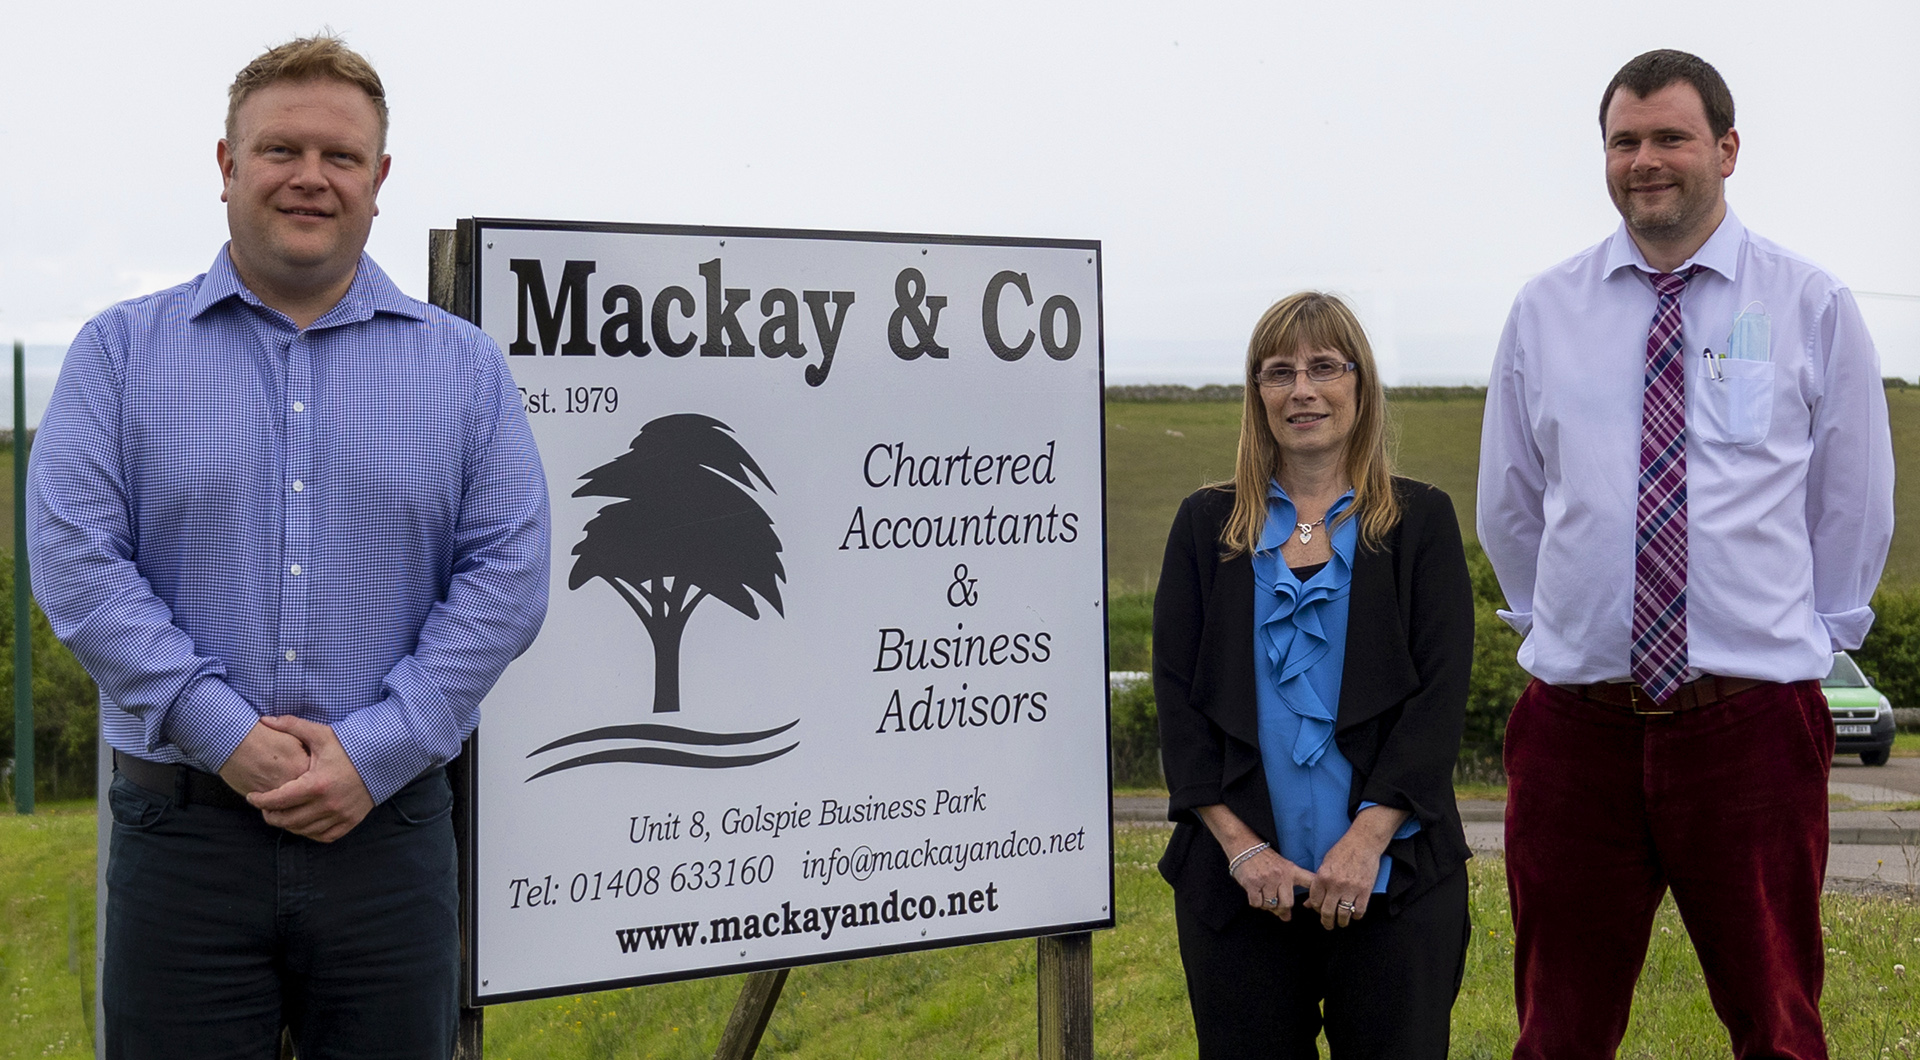 ADHOC HR joins Mackay & Co group in strengthening of offering to UK client base